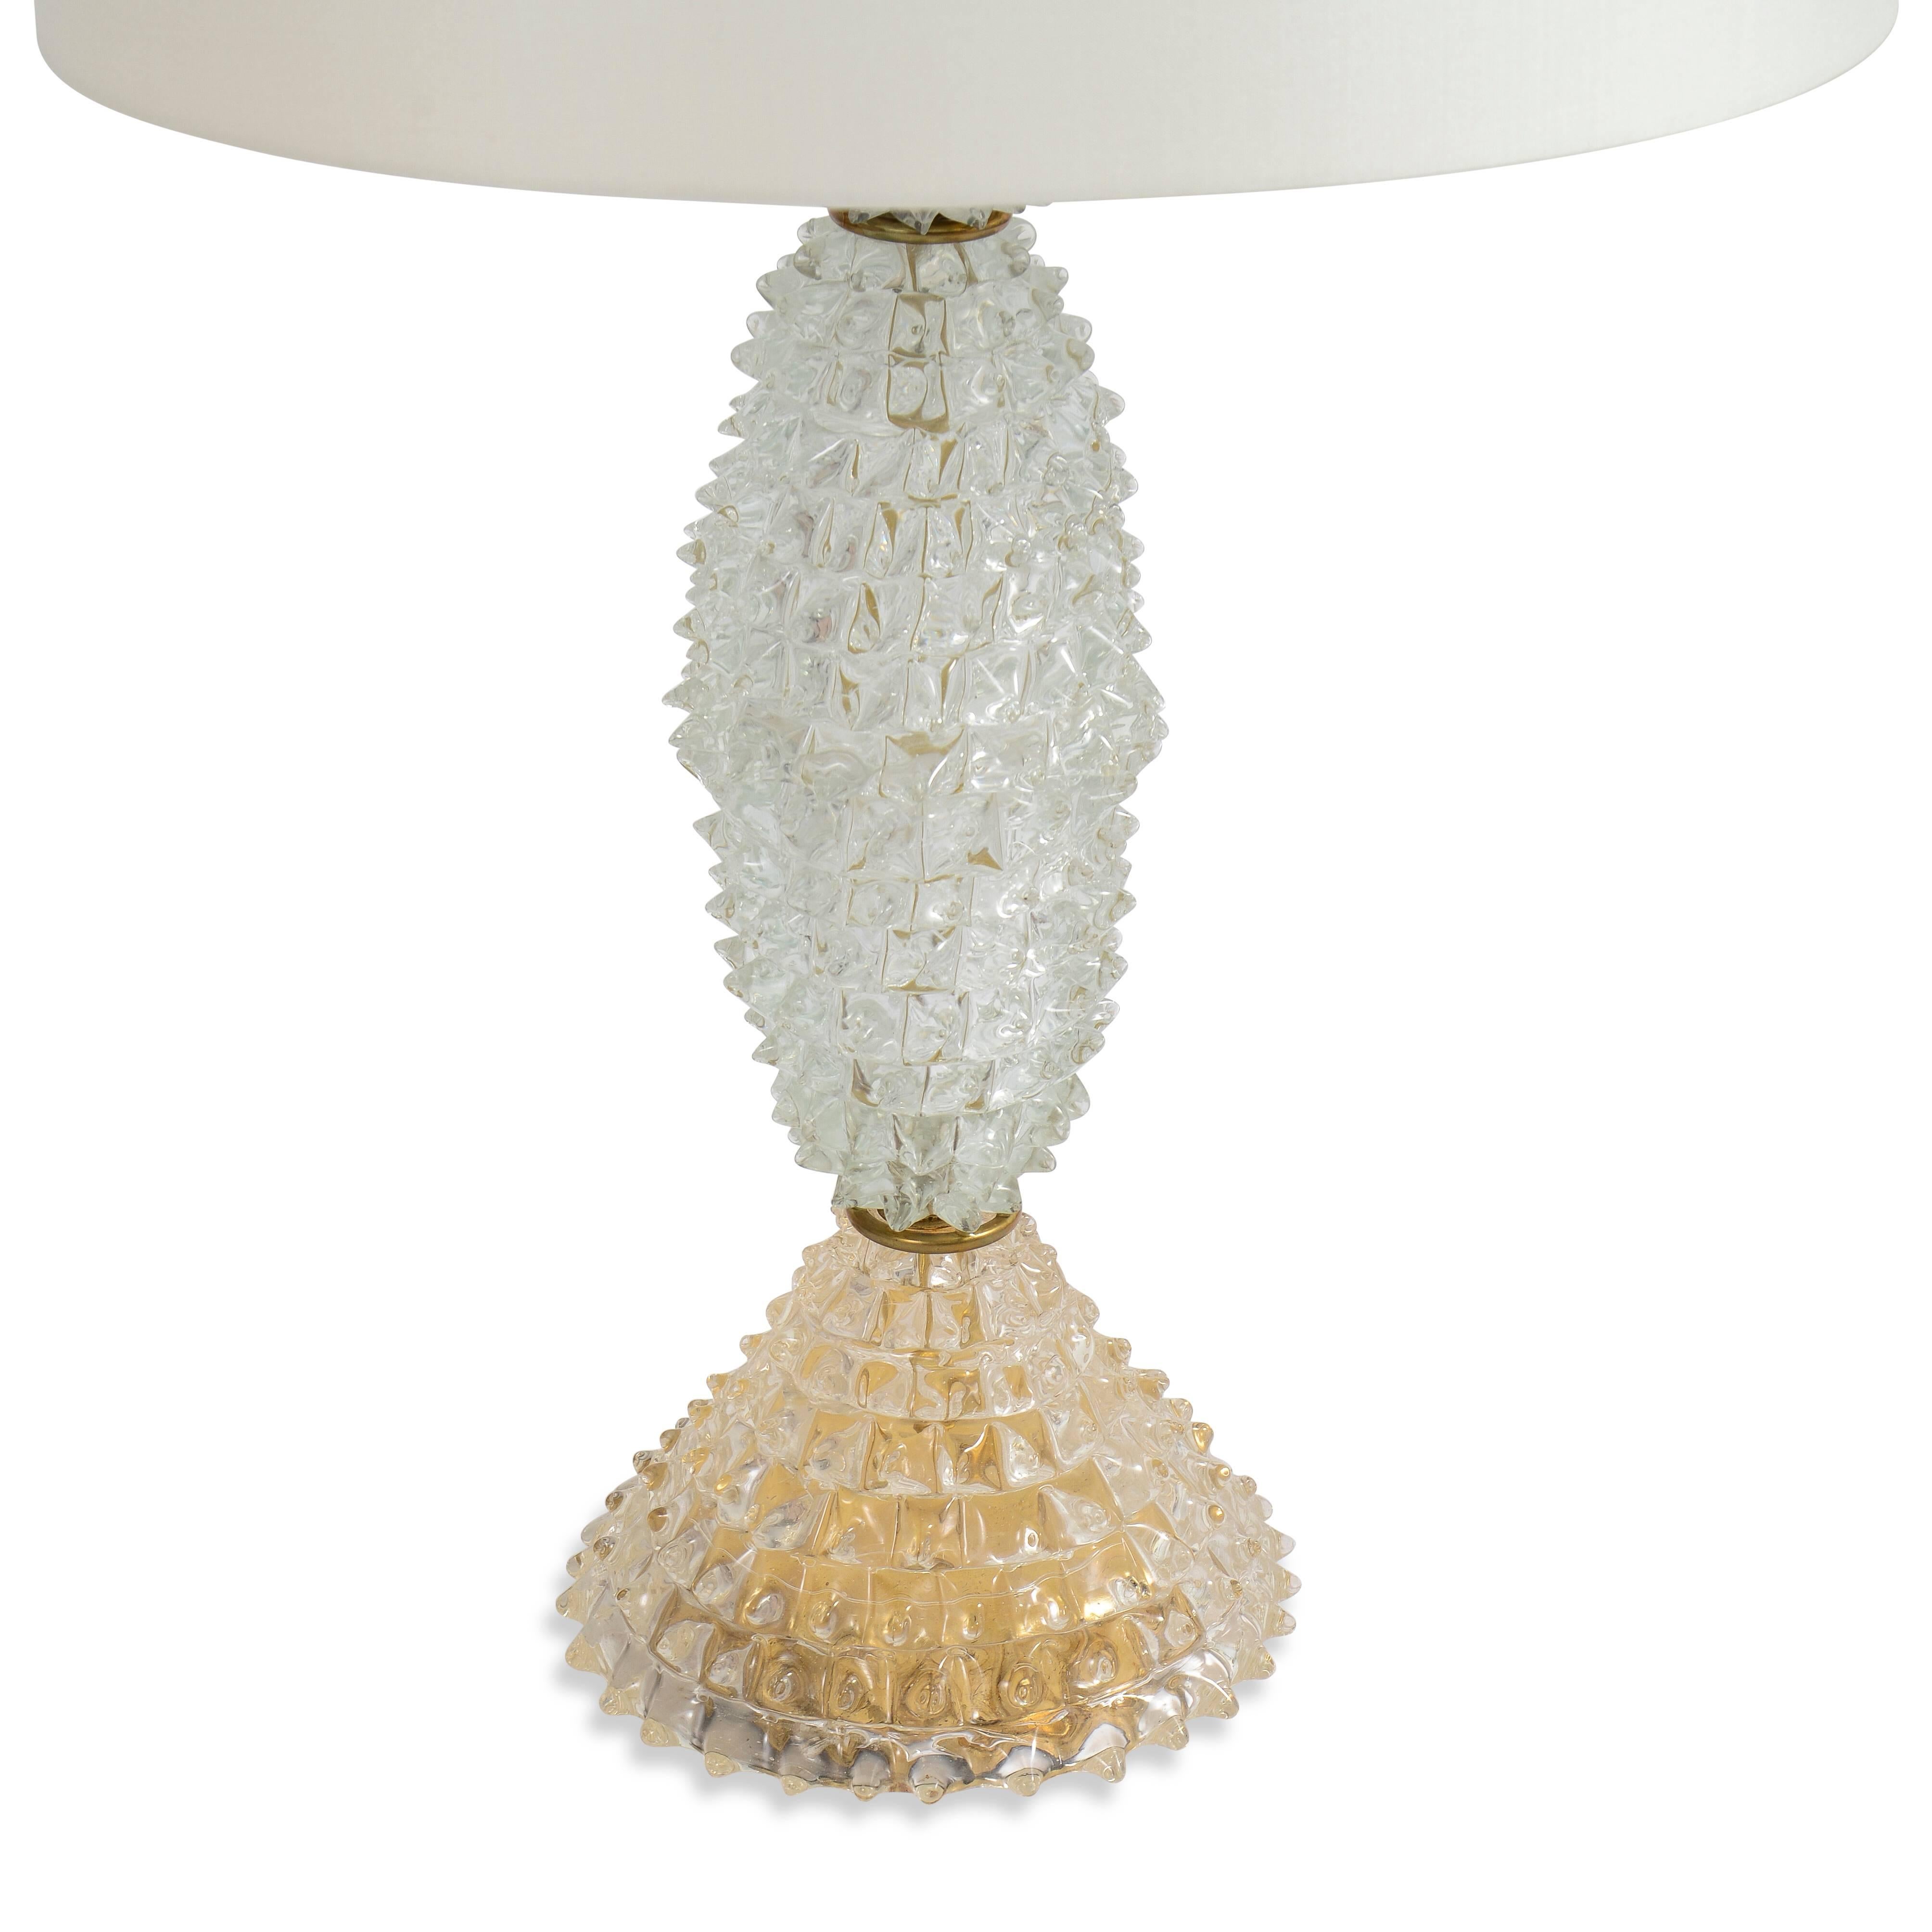 Molded glass table lamp on gilded stepped base.